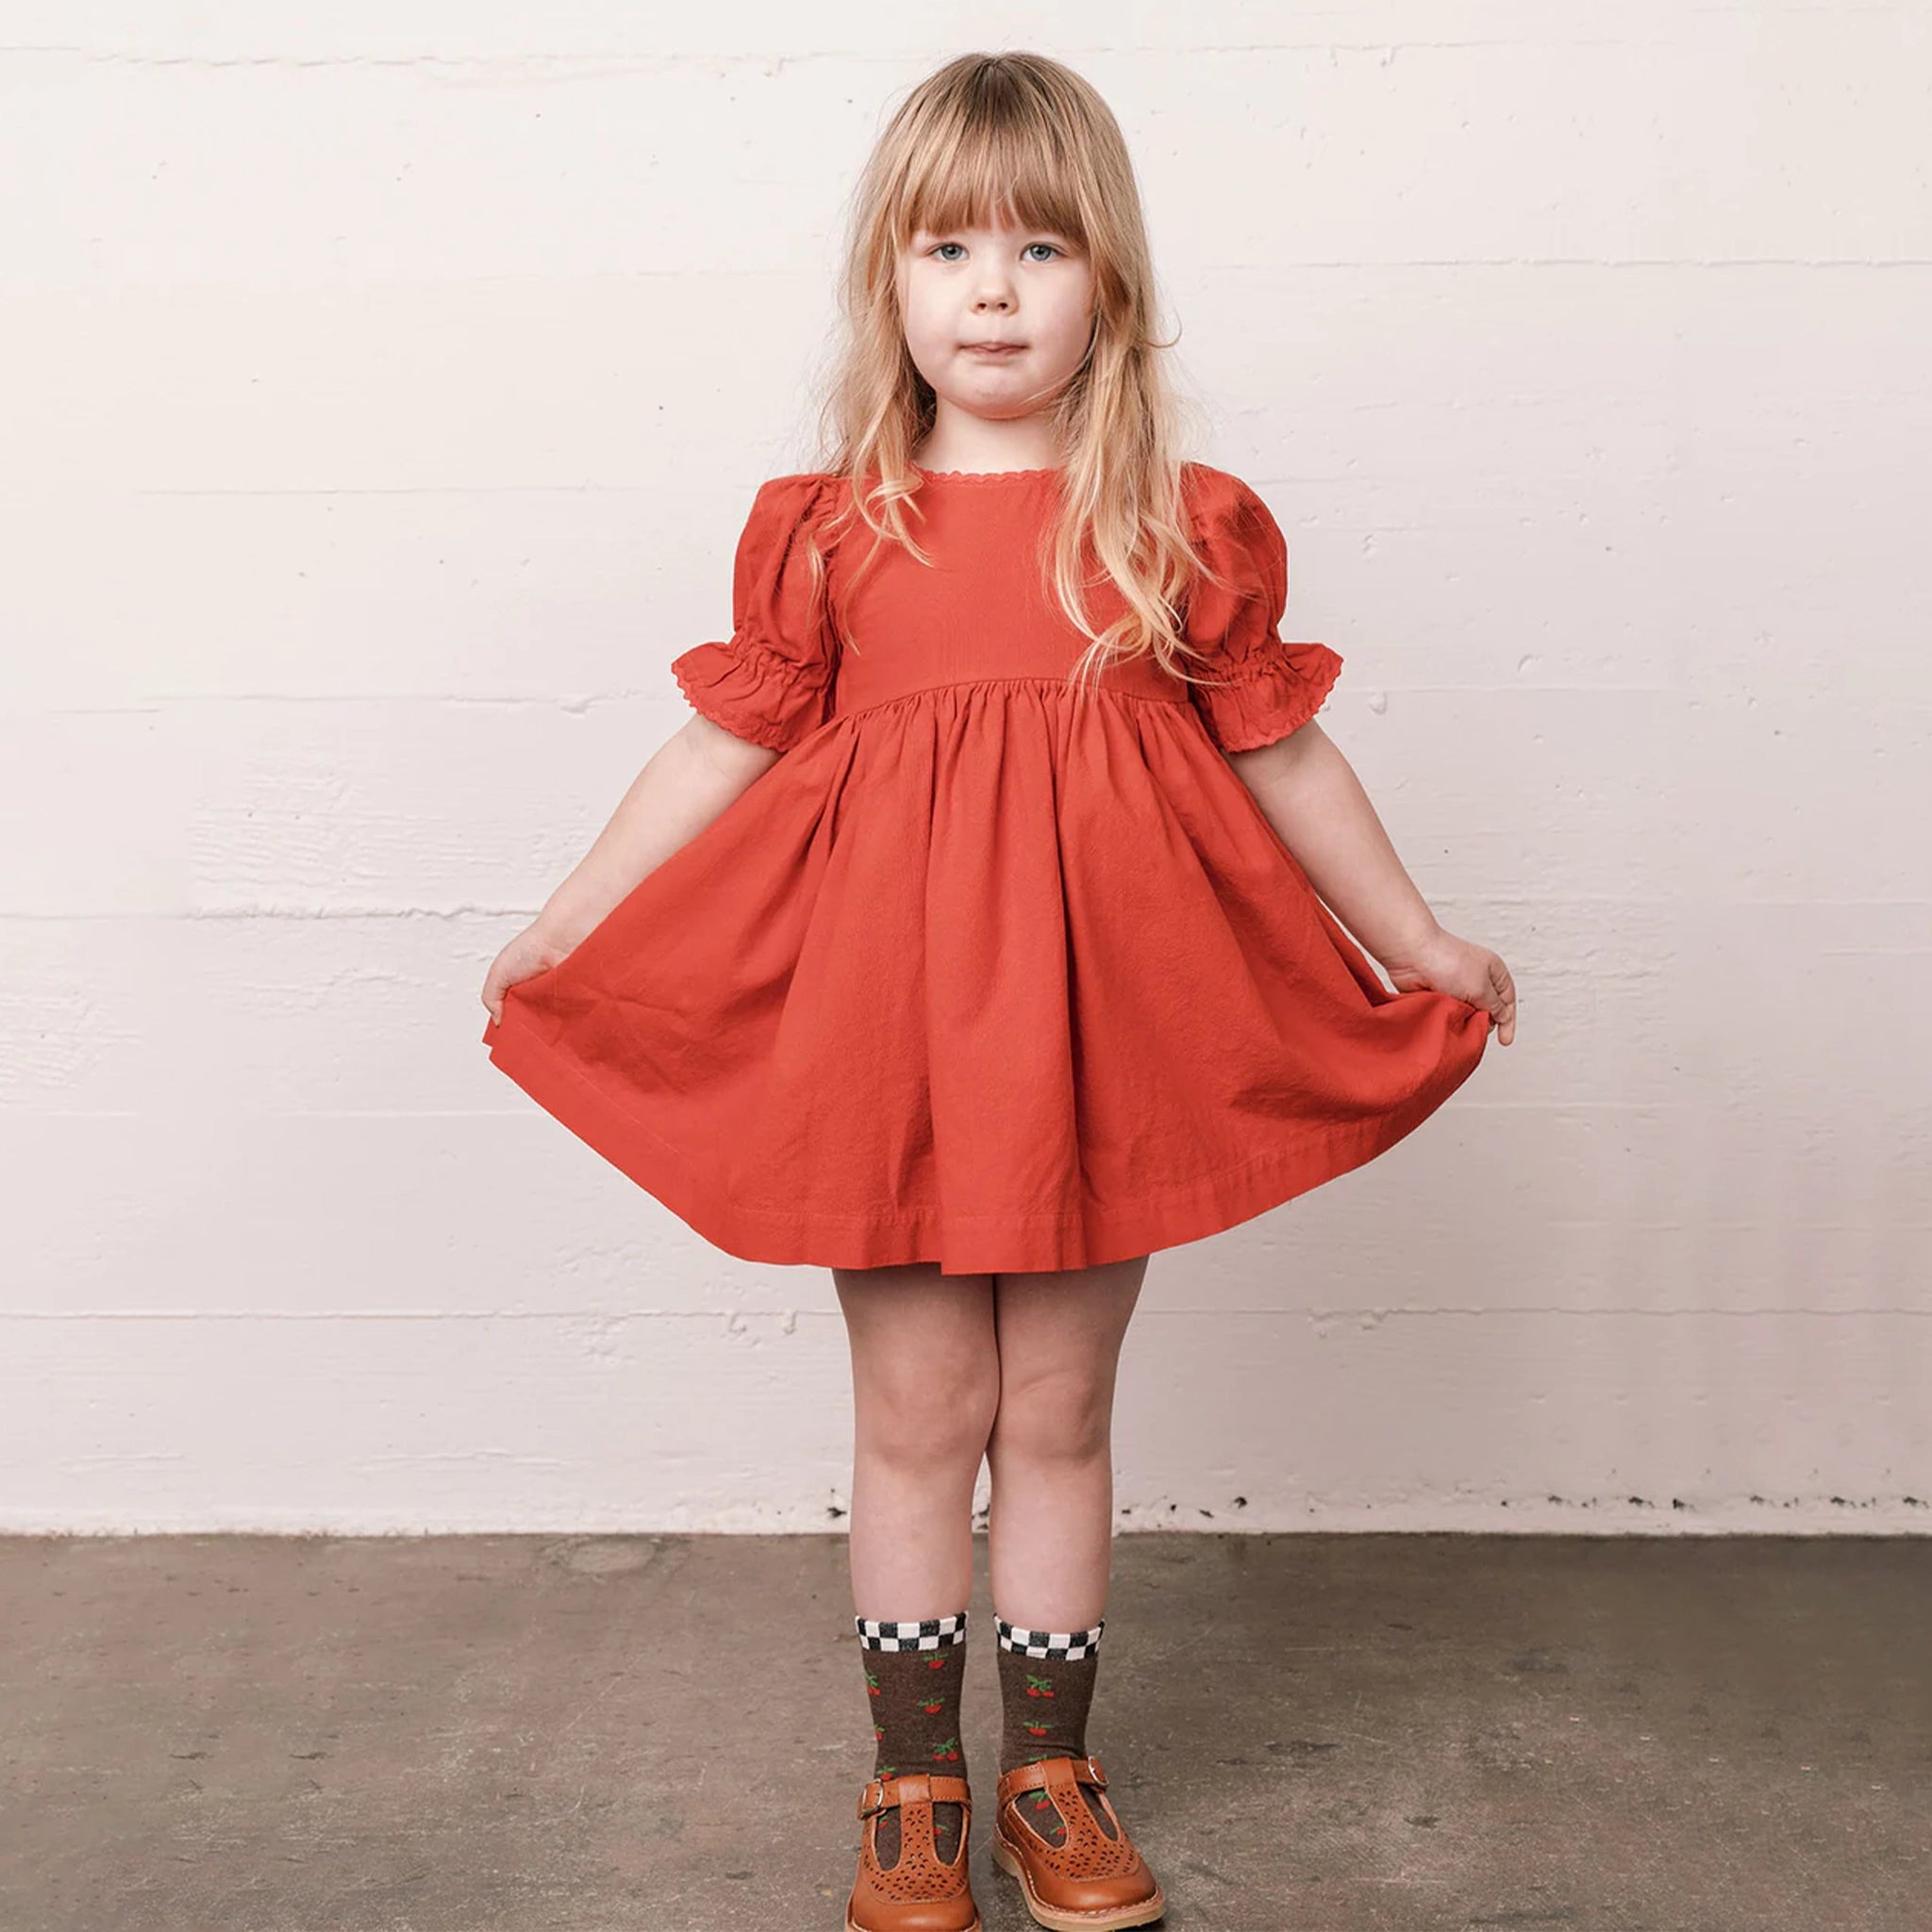 In front of a cream wall is a children's model wearing a red baby doll style dress with puffy sleeve details.